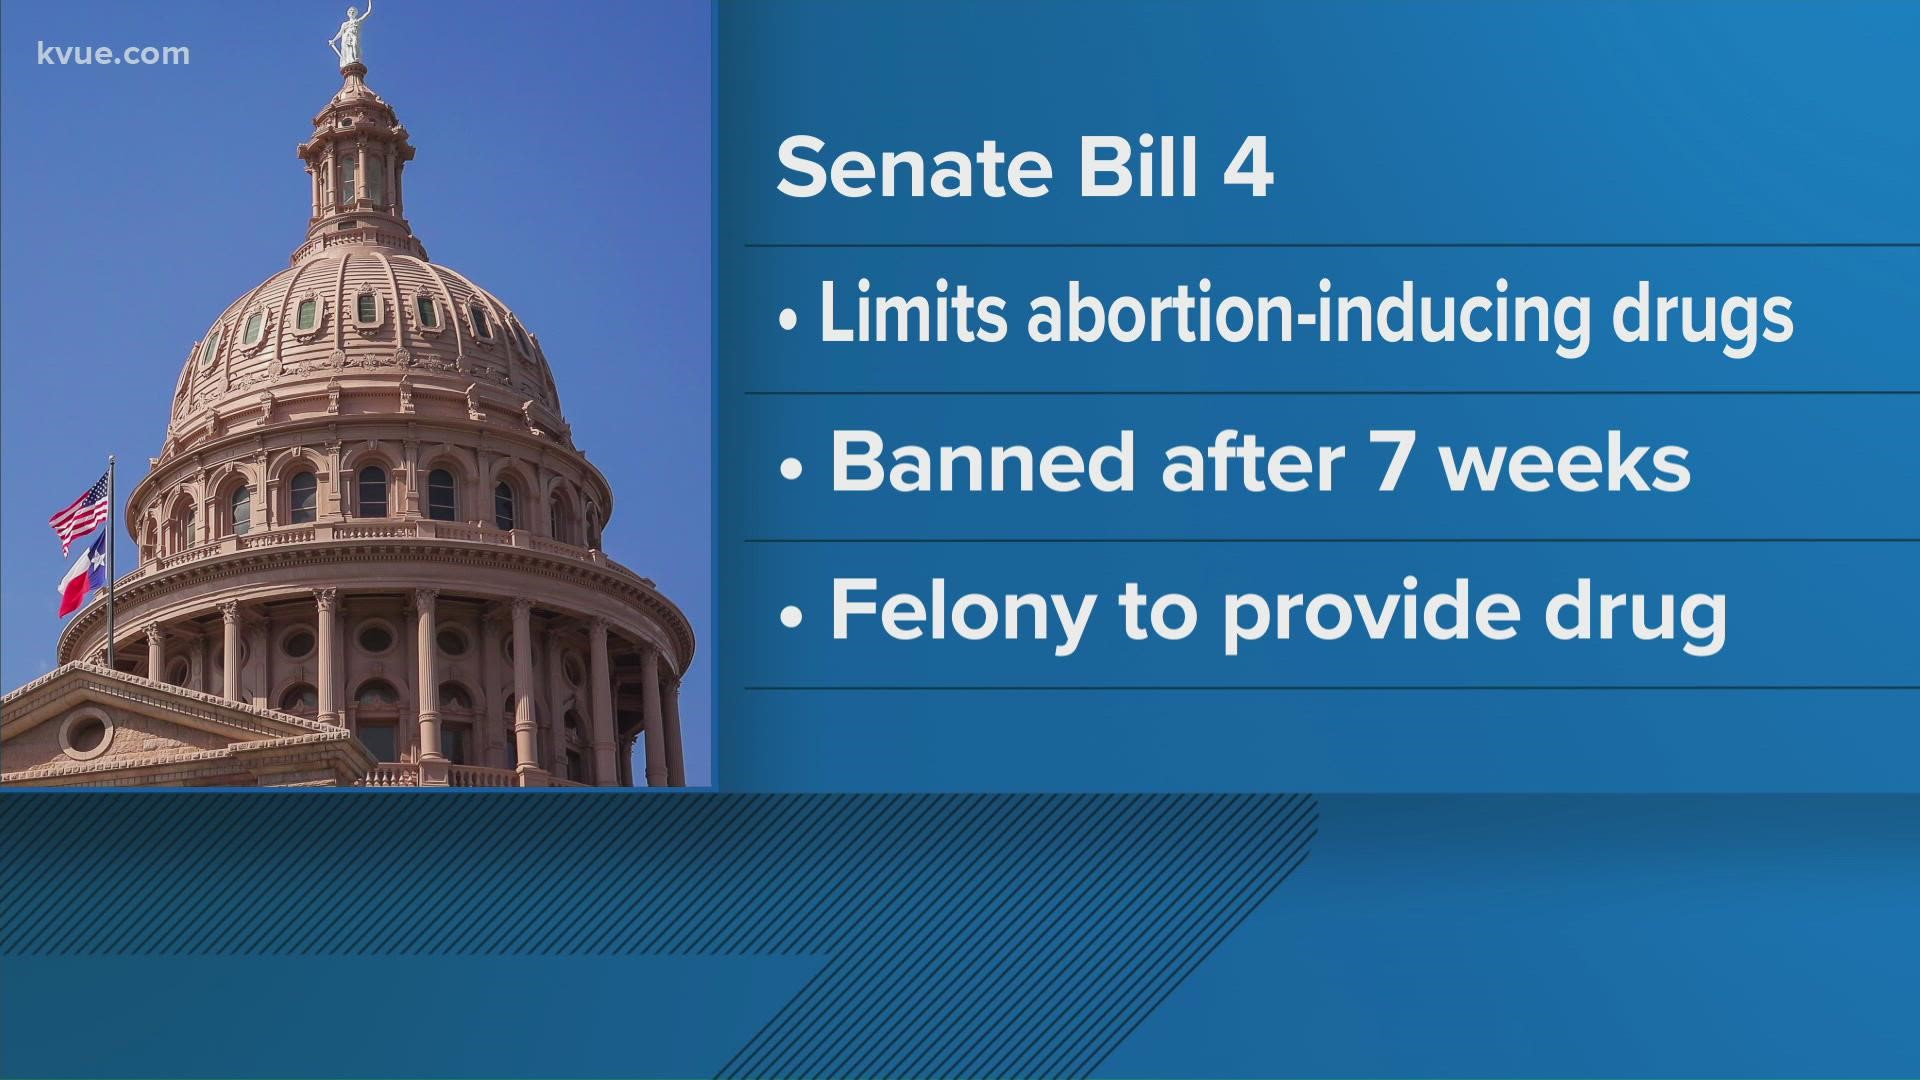 There are new controversial laws taking effect in Texas.